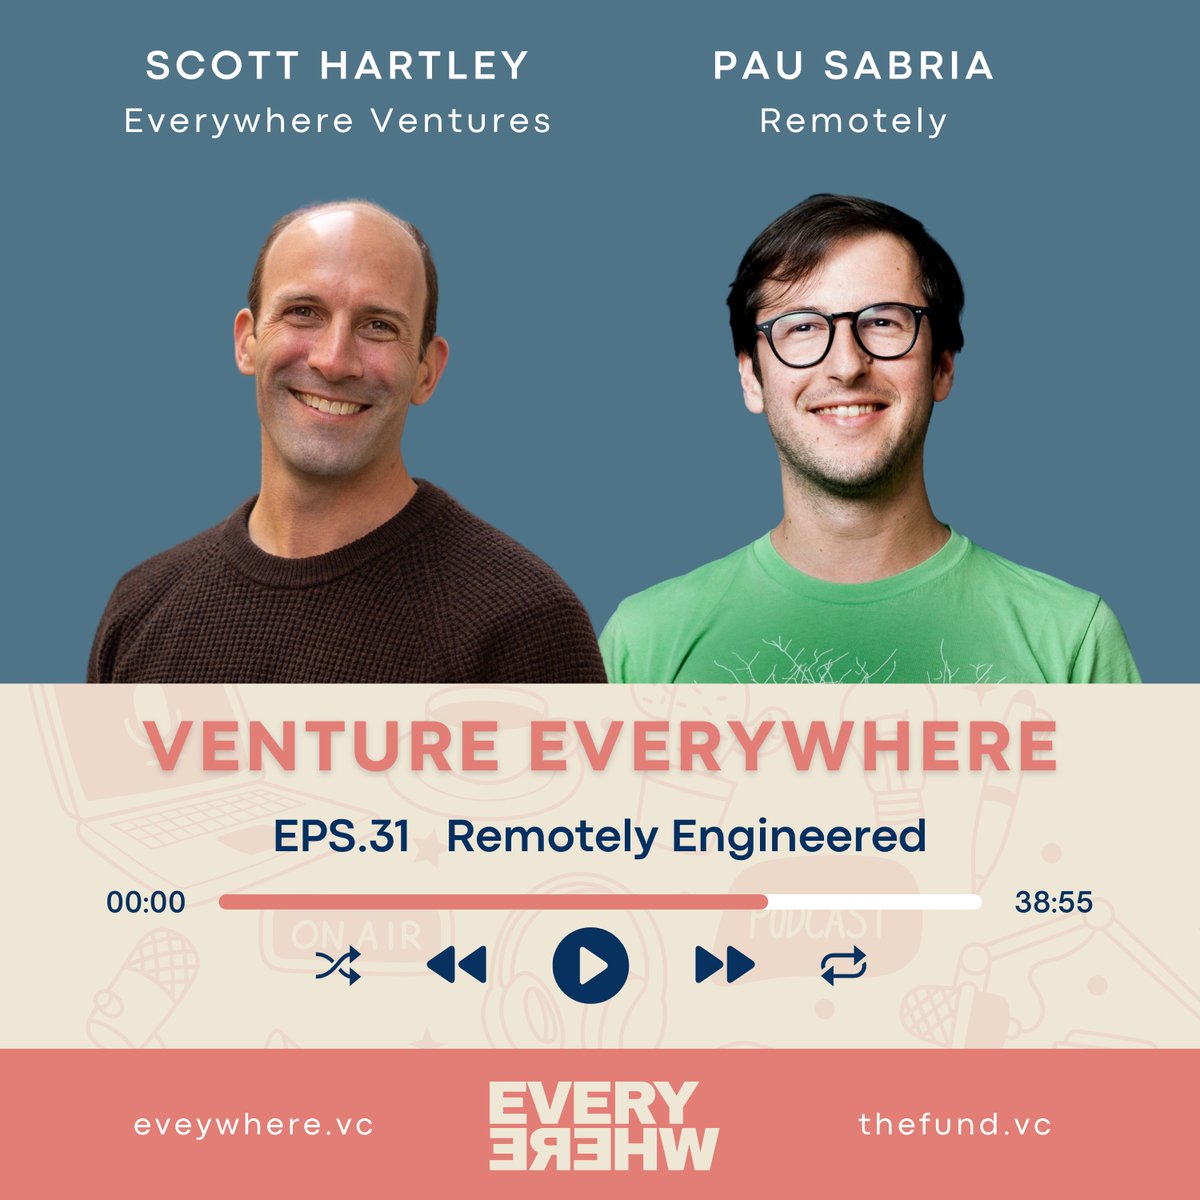 ON AIR: Venture Everywhere #Podcast EPS 31🎙️ Remotely Engineered with @scottehartley, MP of @EverywhereVC & @kuap, co-founder of @RemotelyWorksHQ. 🎧Listen now: 🍎 Apple: podcasts.apple.com/us/podcast/rem… 💚 Spotify: open.spotify.com/episode/6UsJnT… 🗒️ Transcript at ideas.everywhere.vc/s/podcast